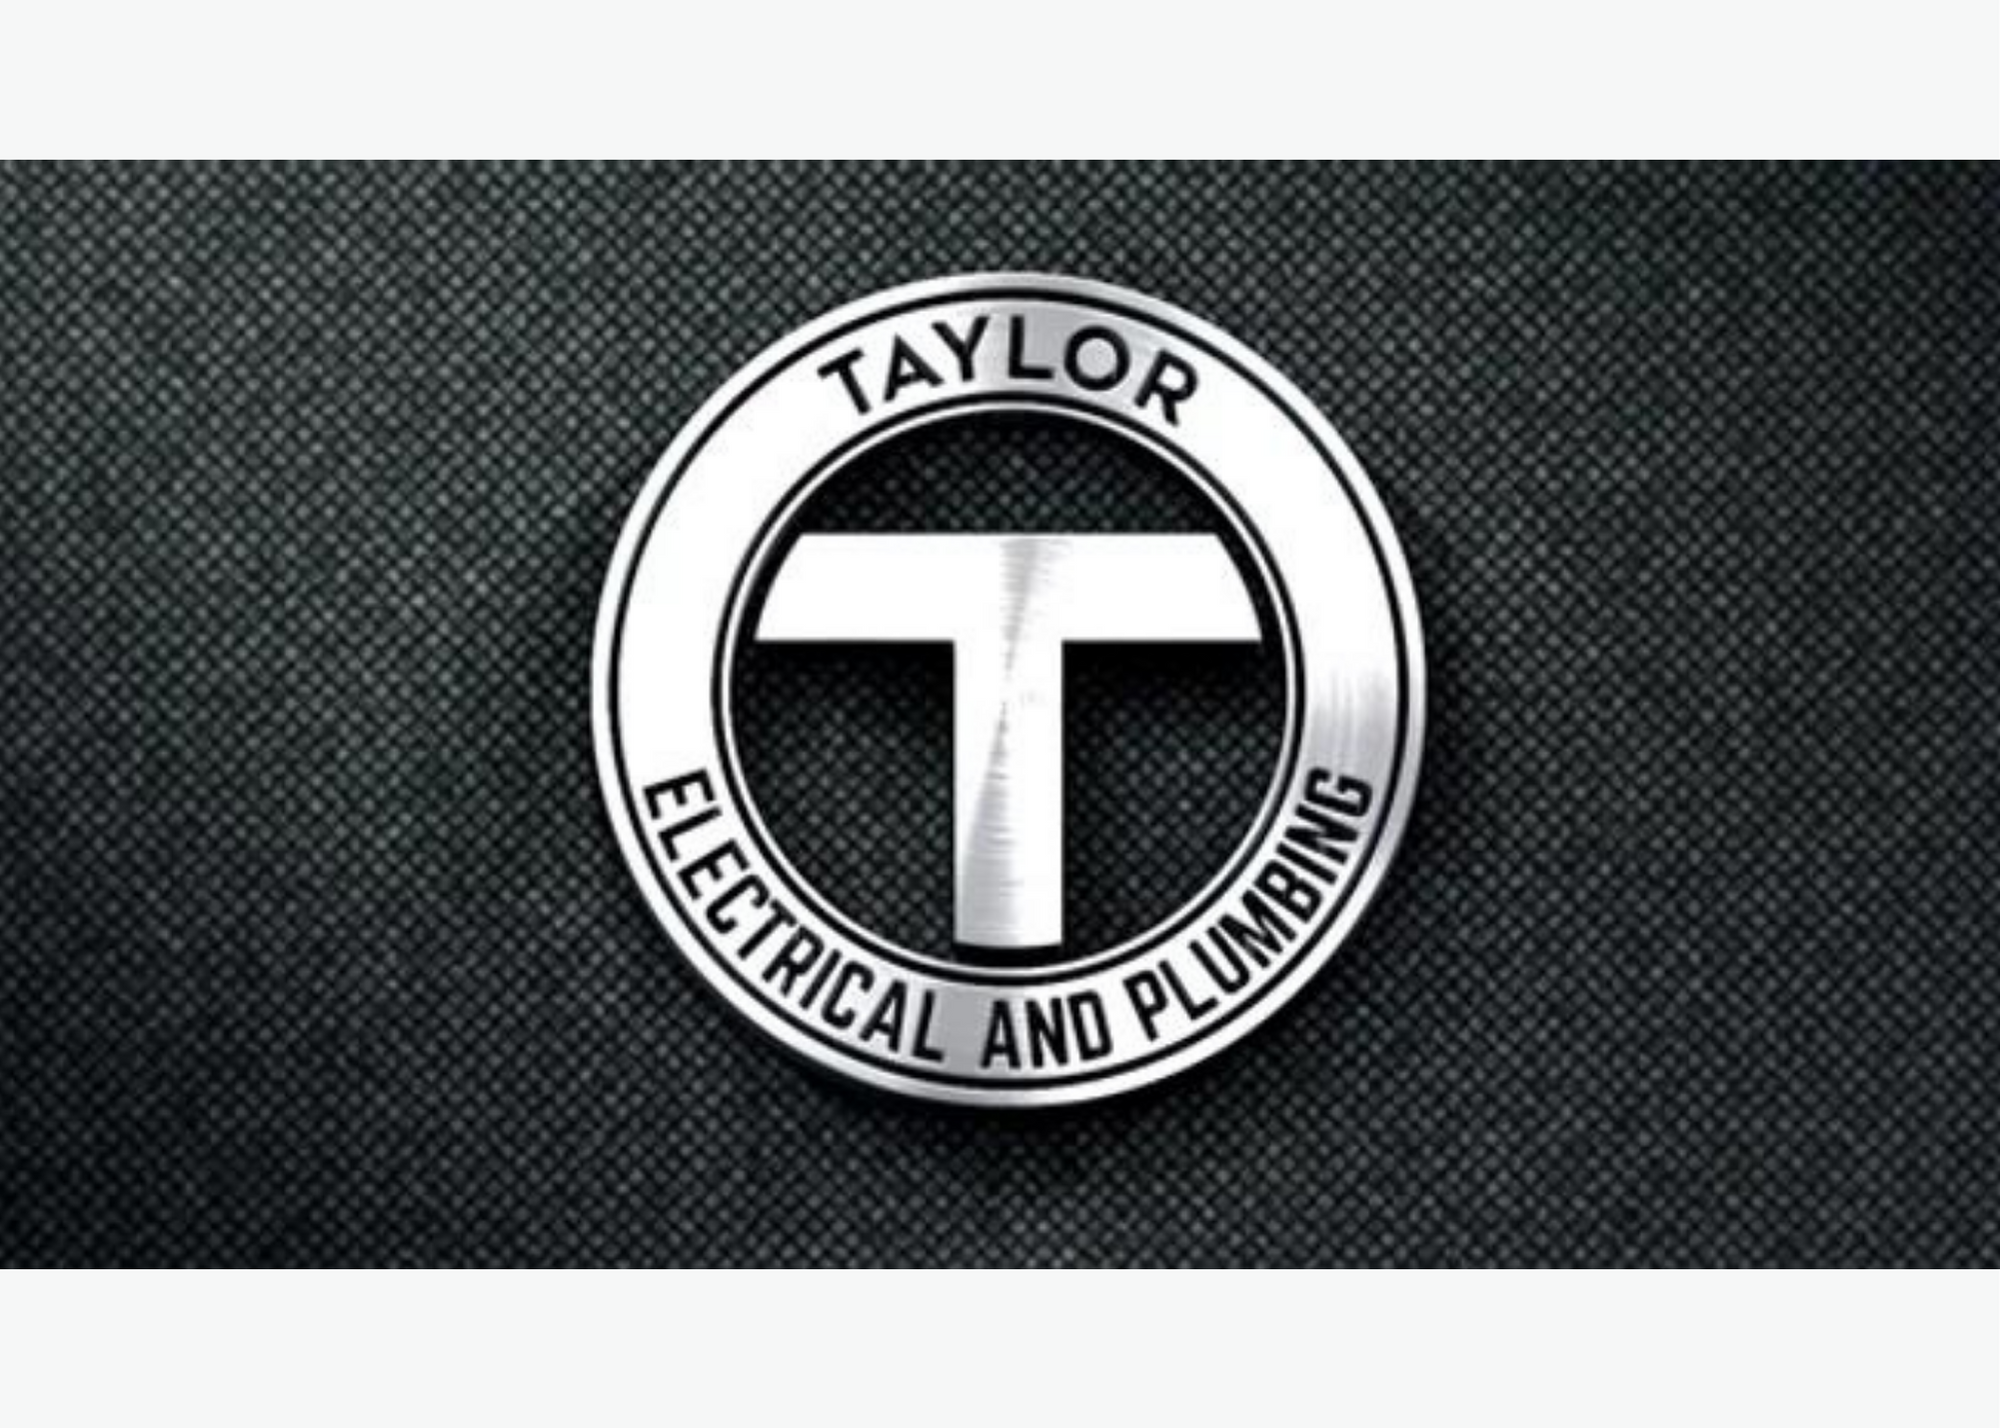 Taylor Electric and plumbing logo